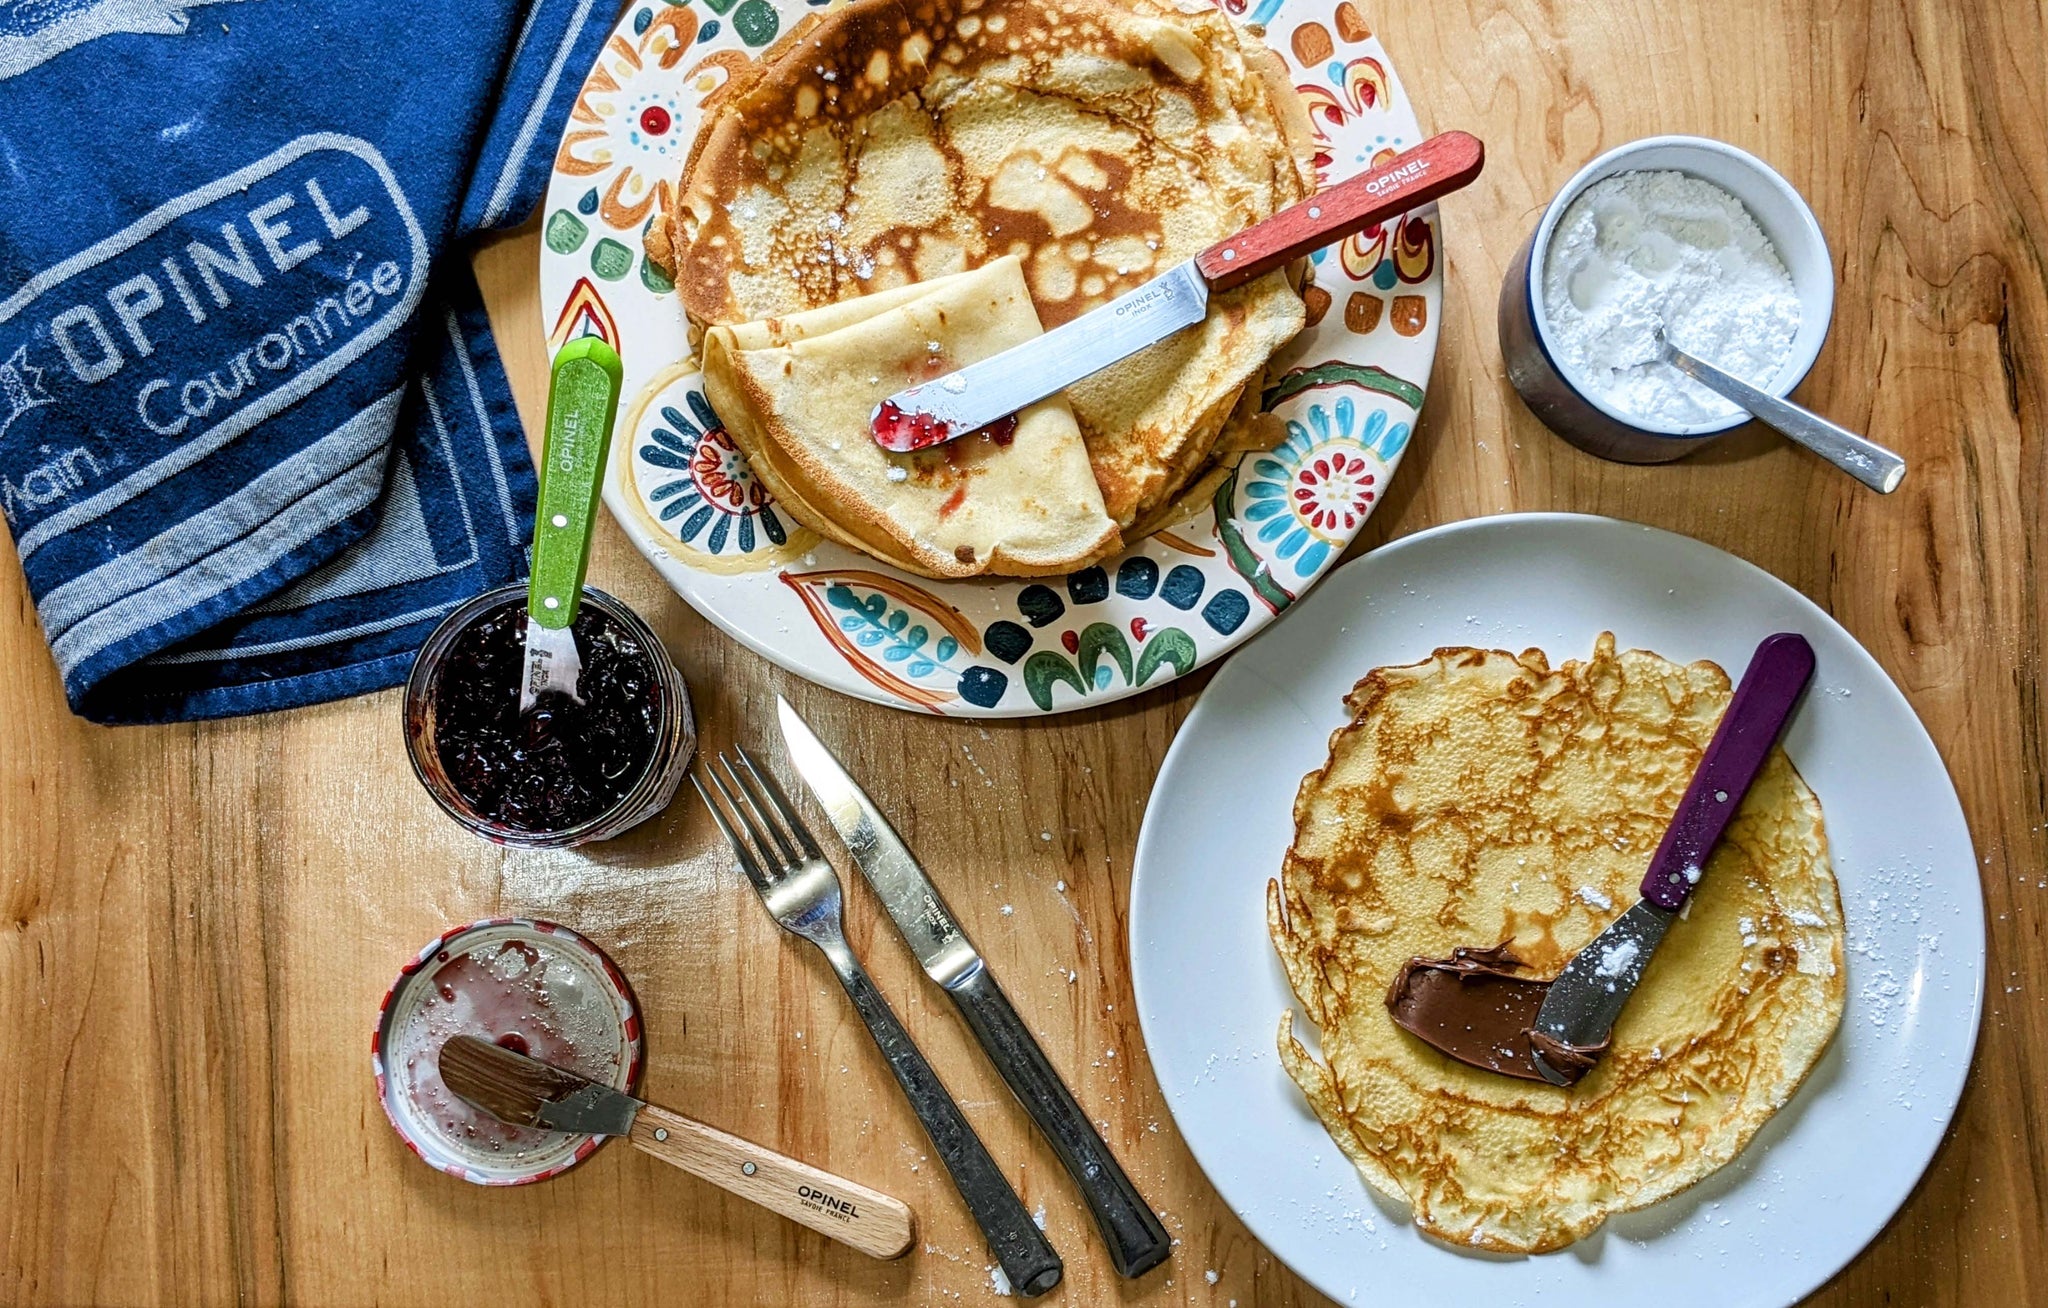 Opinel french crepe recipe spreading brunch knives nutella bonne mamam